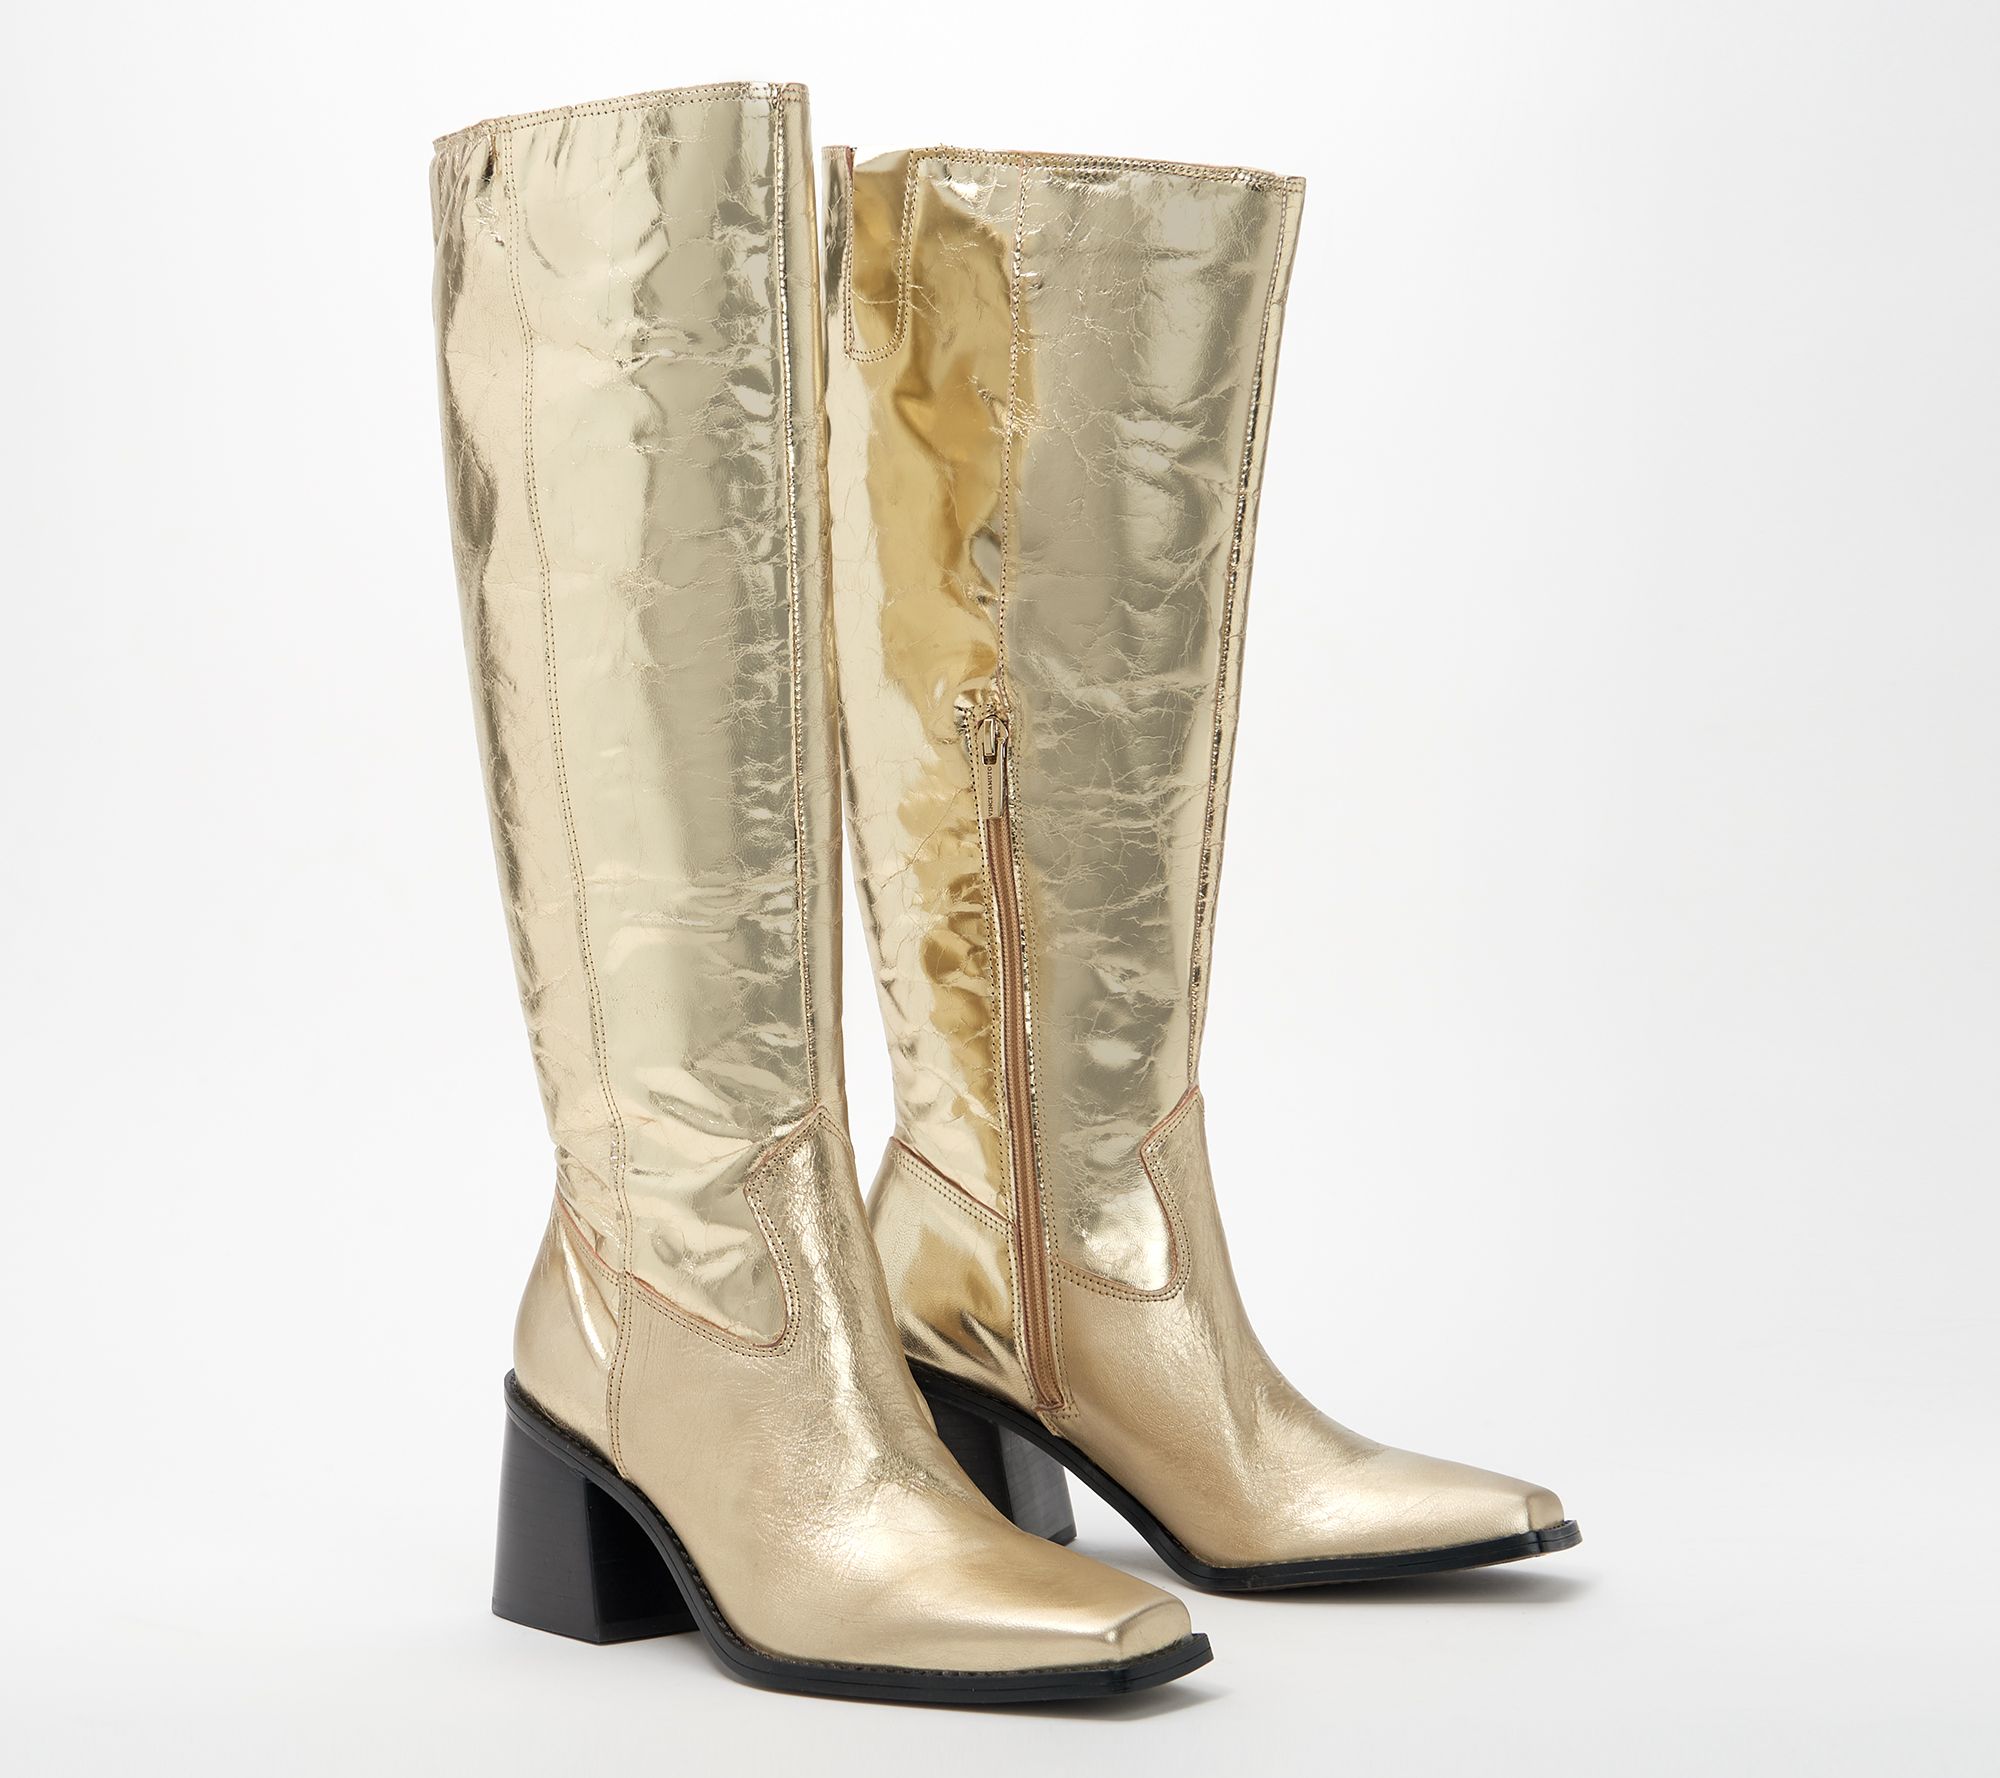 Vince Camuto Leather or Suede Ankle Boots - Okalinra